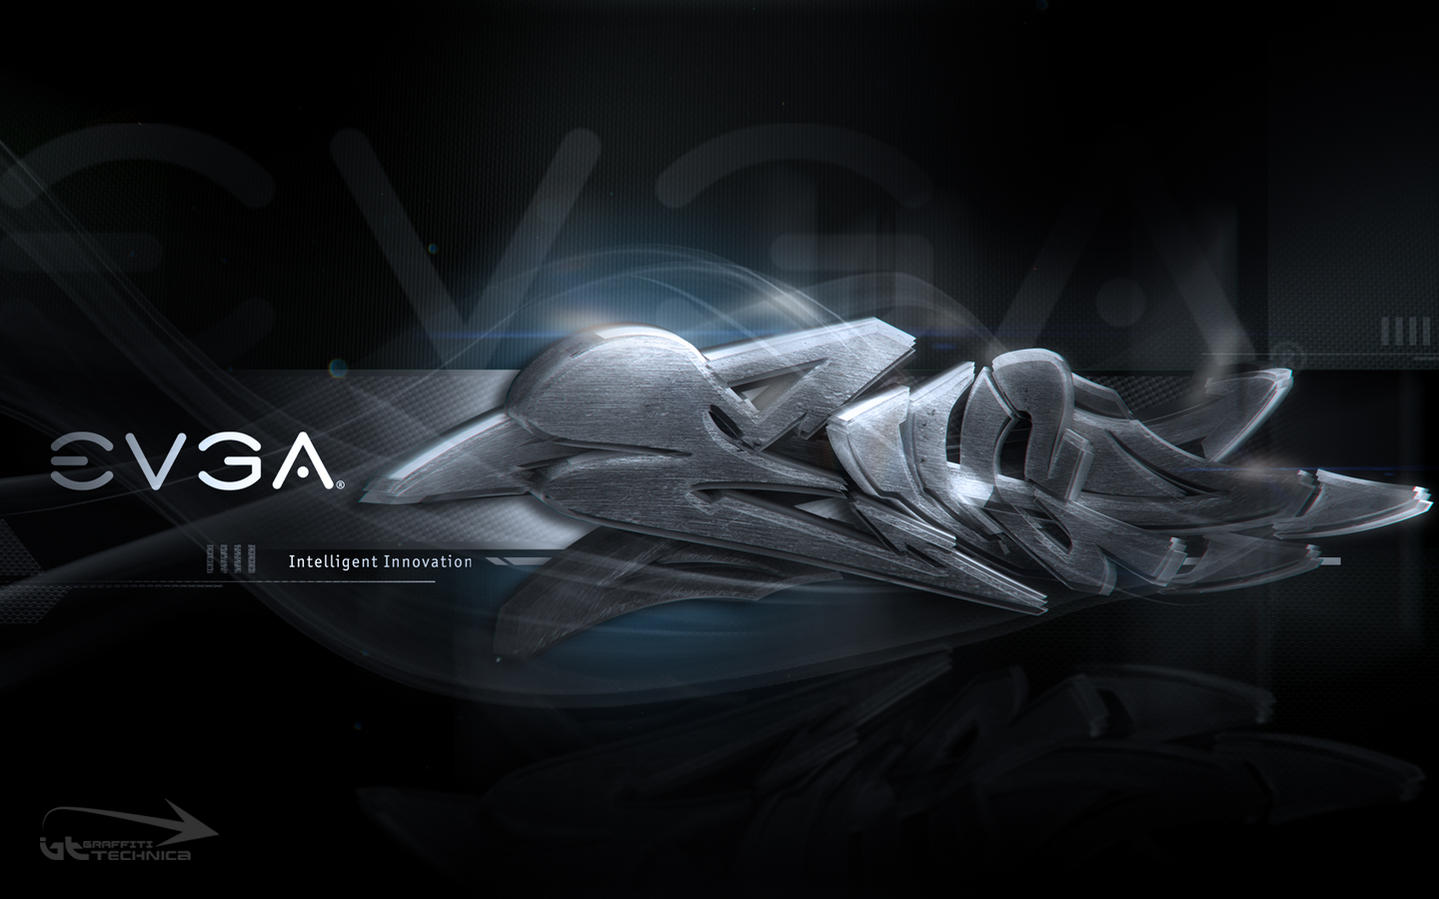 Evga Wallpapers Up Techpowerup Forums